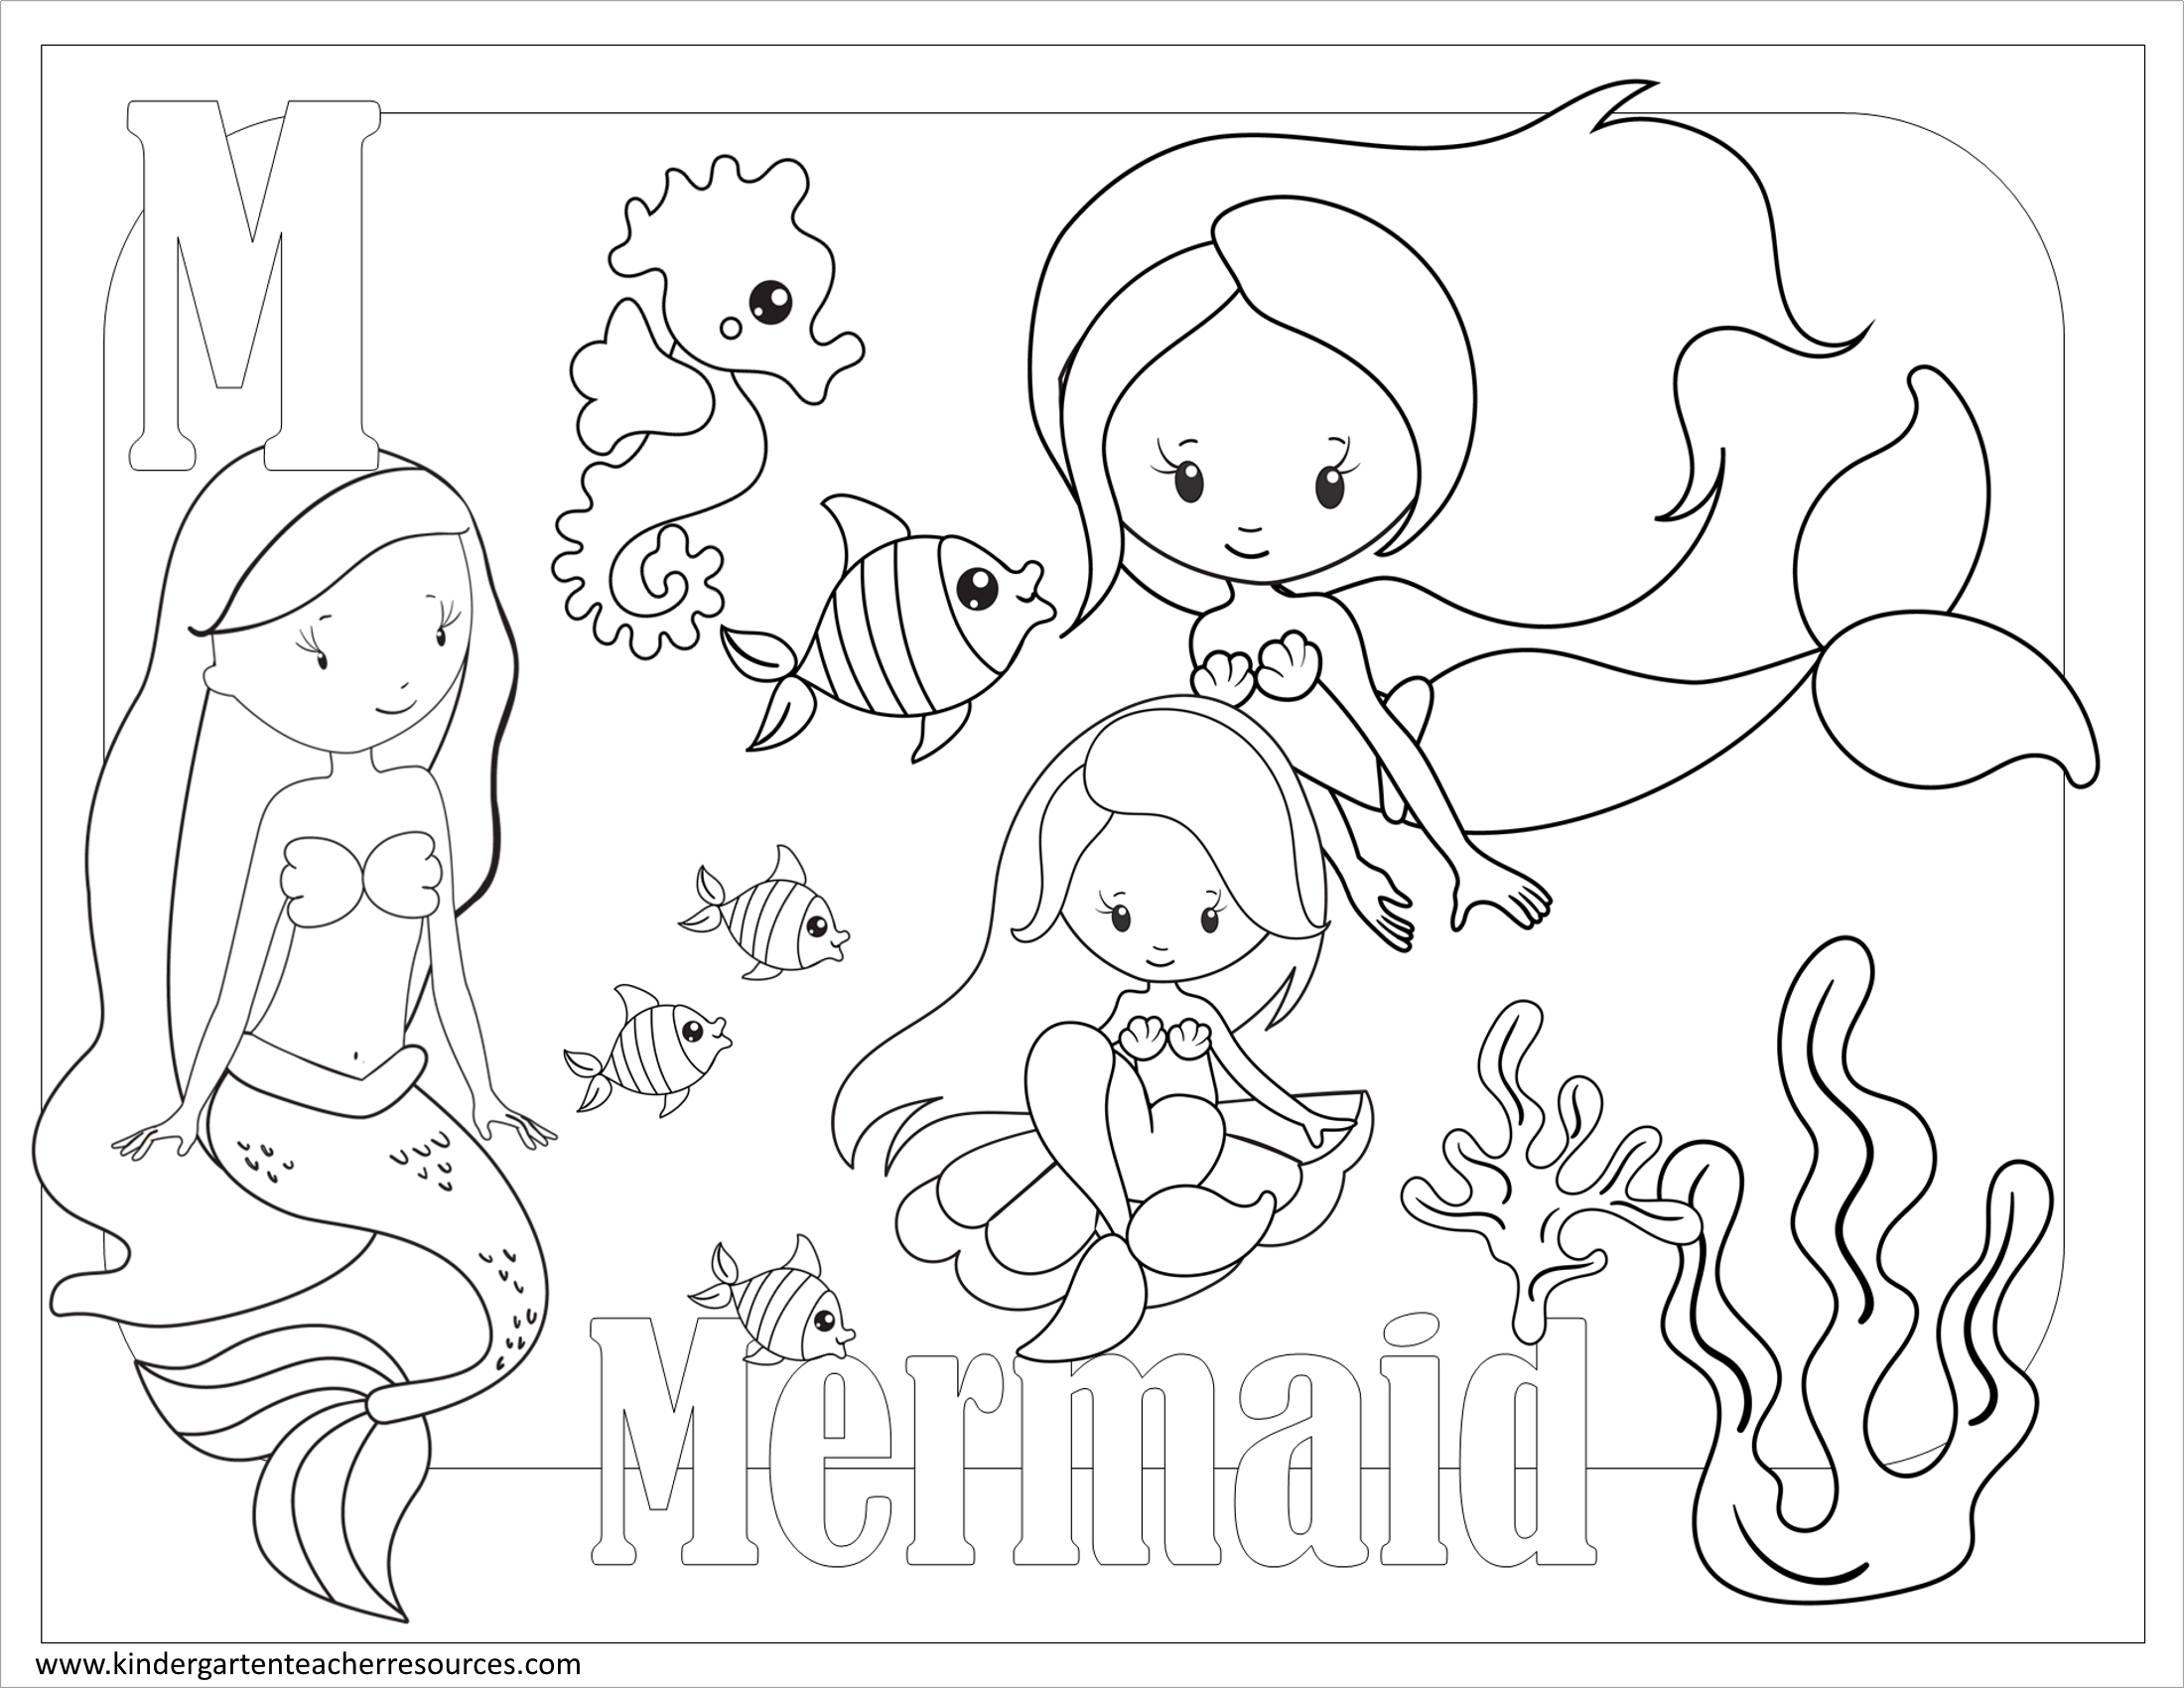 Free Printable Coloring Pages for Kindergarten